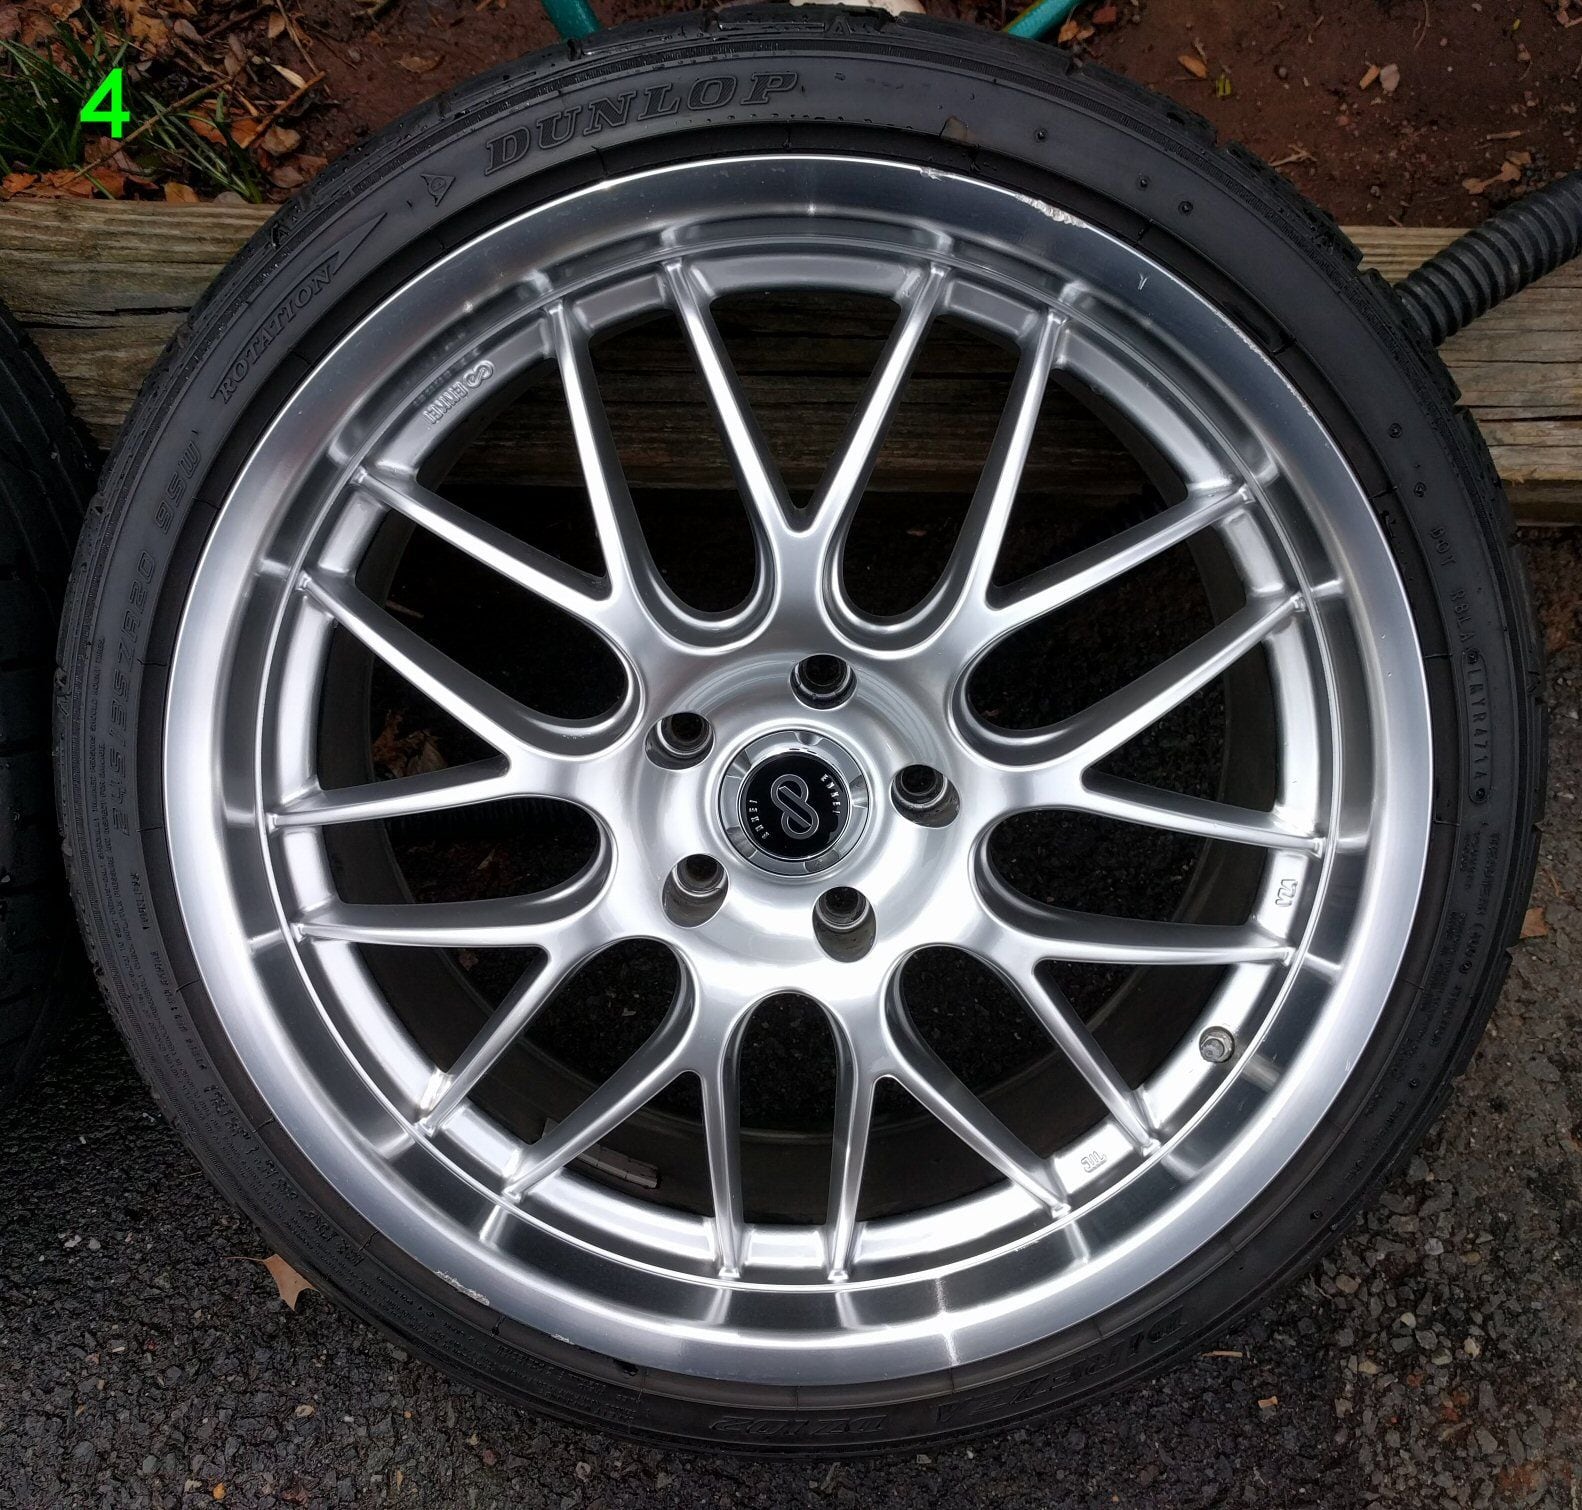 Wheels and Tires/Axles - EXPIRED: 20"x8.5"+40 5x120 EnkeiLussoSilver+245/35/20 Dunlop Direzza DZ102+TPMS+Parts - Used - 2009 to 2014 Acura TL - Morris County, NJ 07936, United States